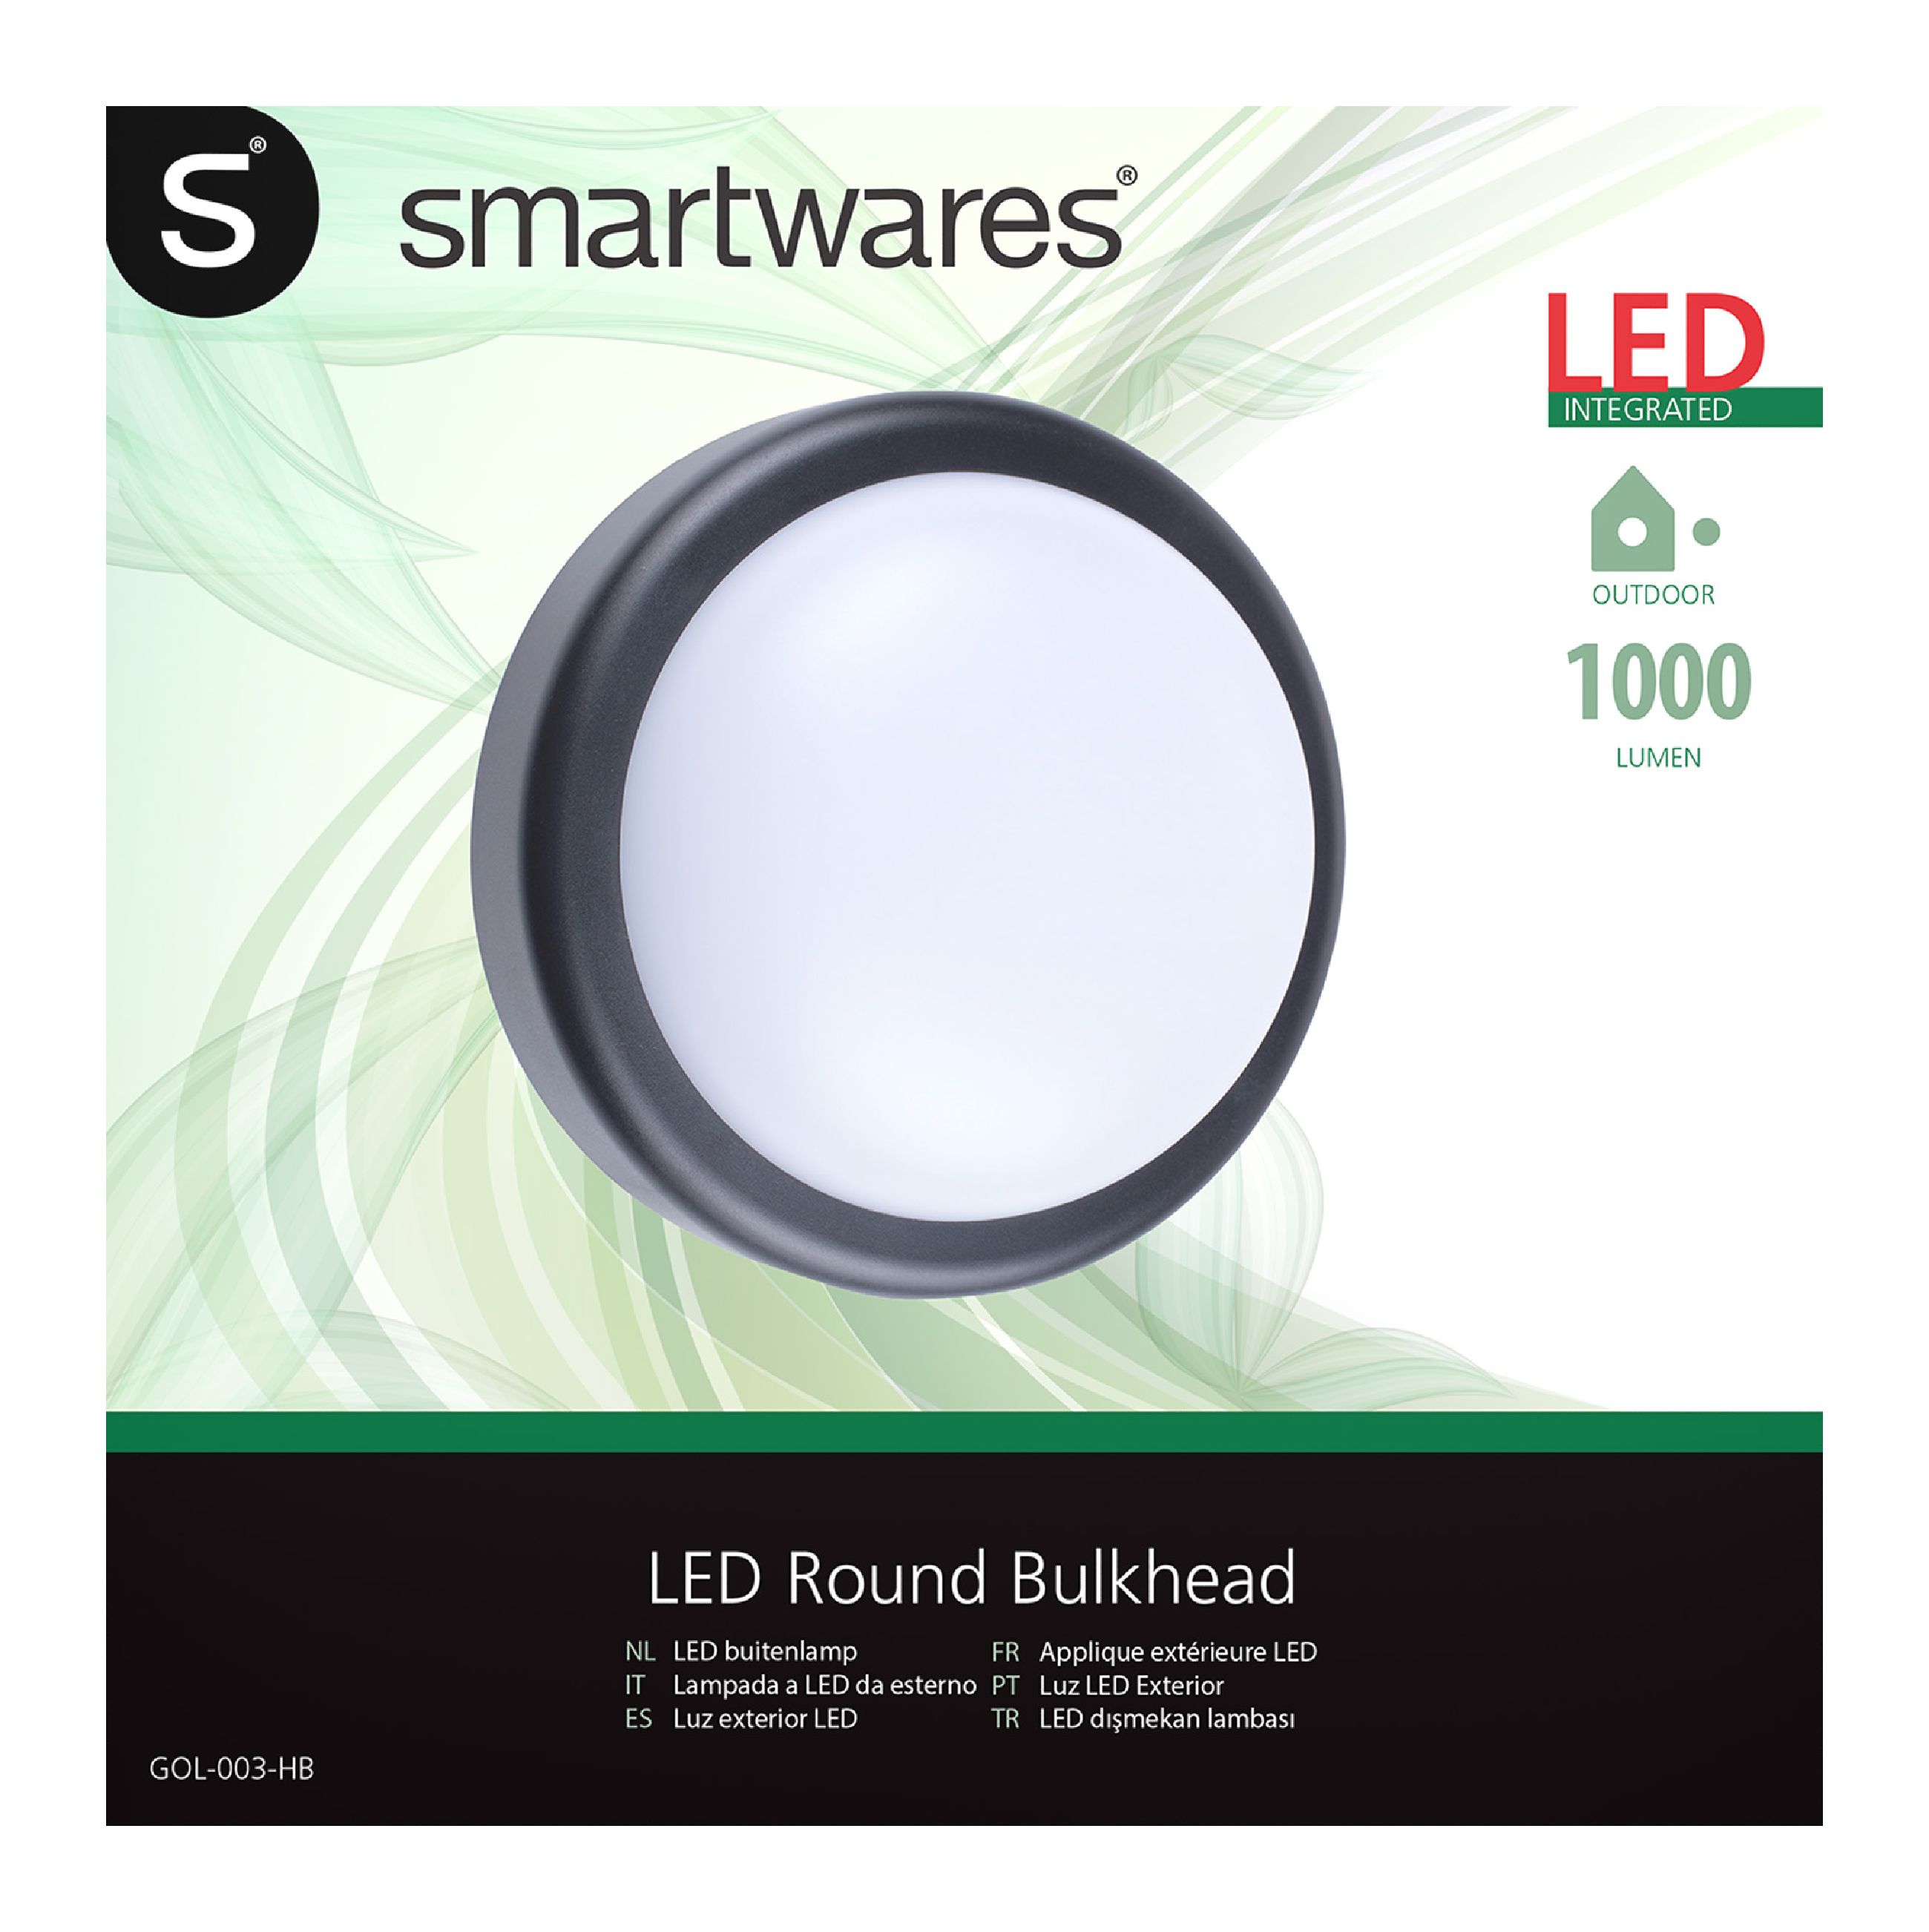 MAX-LED Oval Bulkhead Wall LED Light 14w Neutral White Garage Outdoor Ip54 for sale online